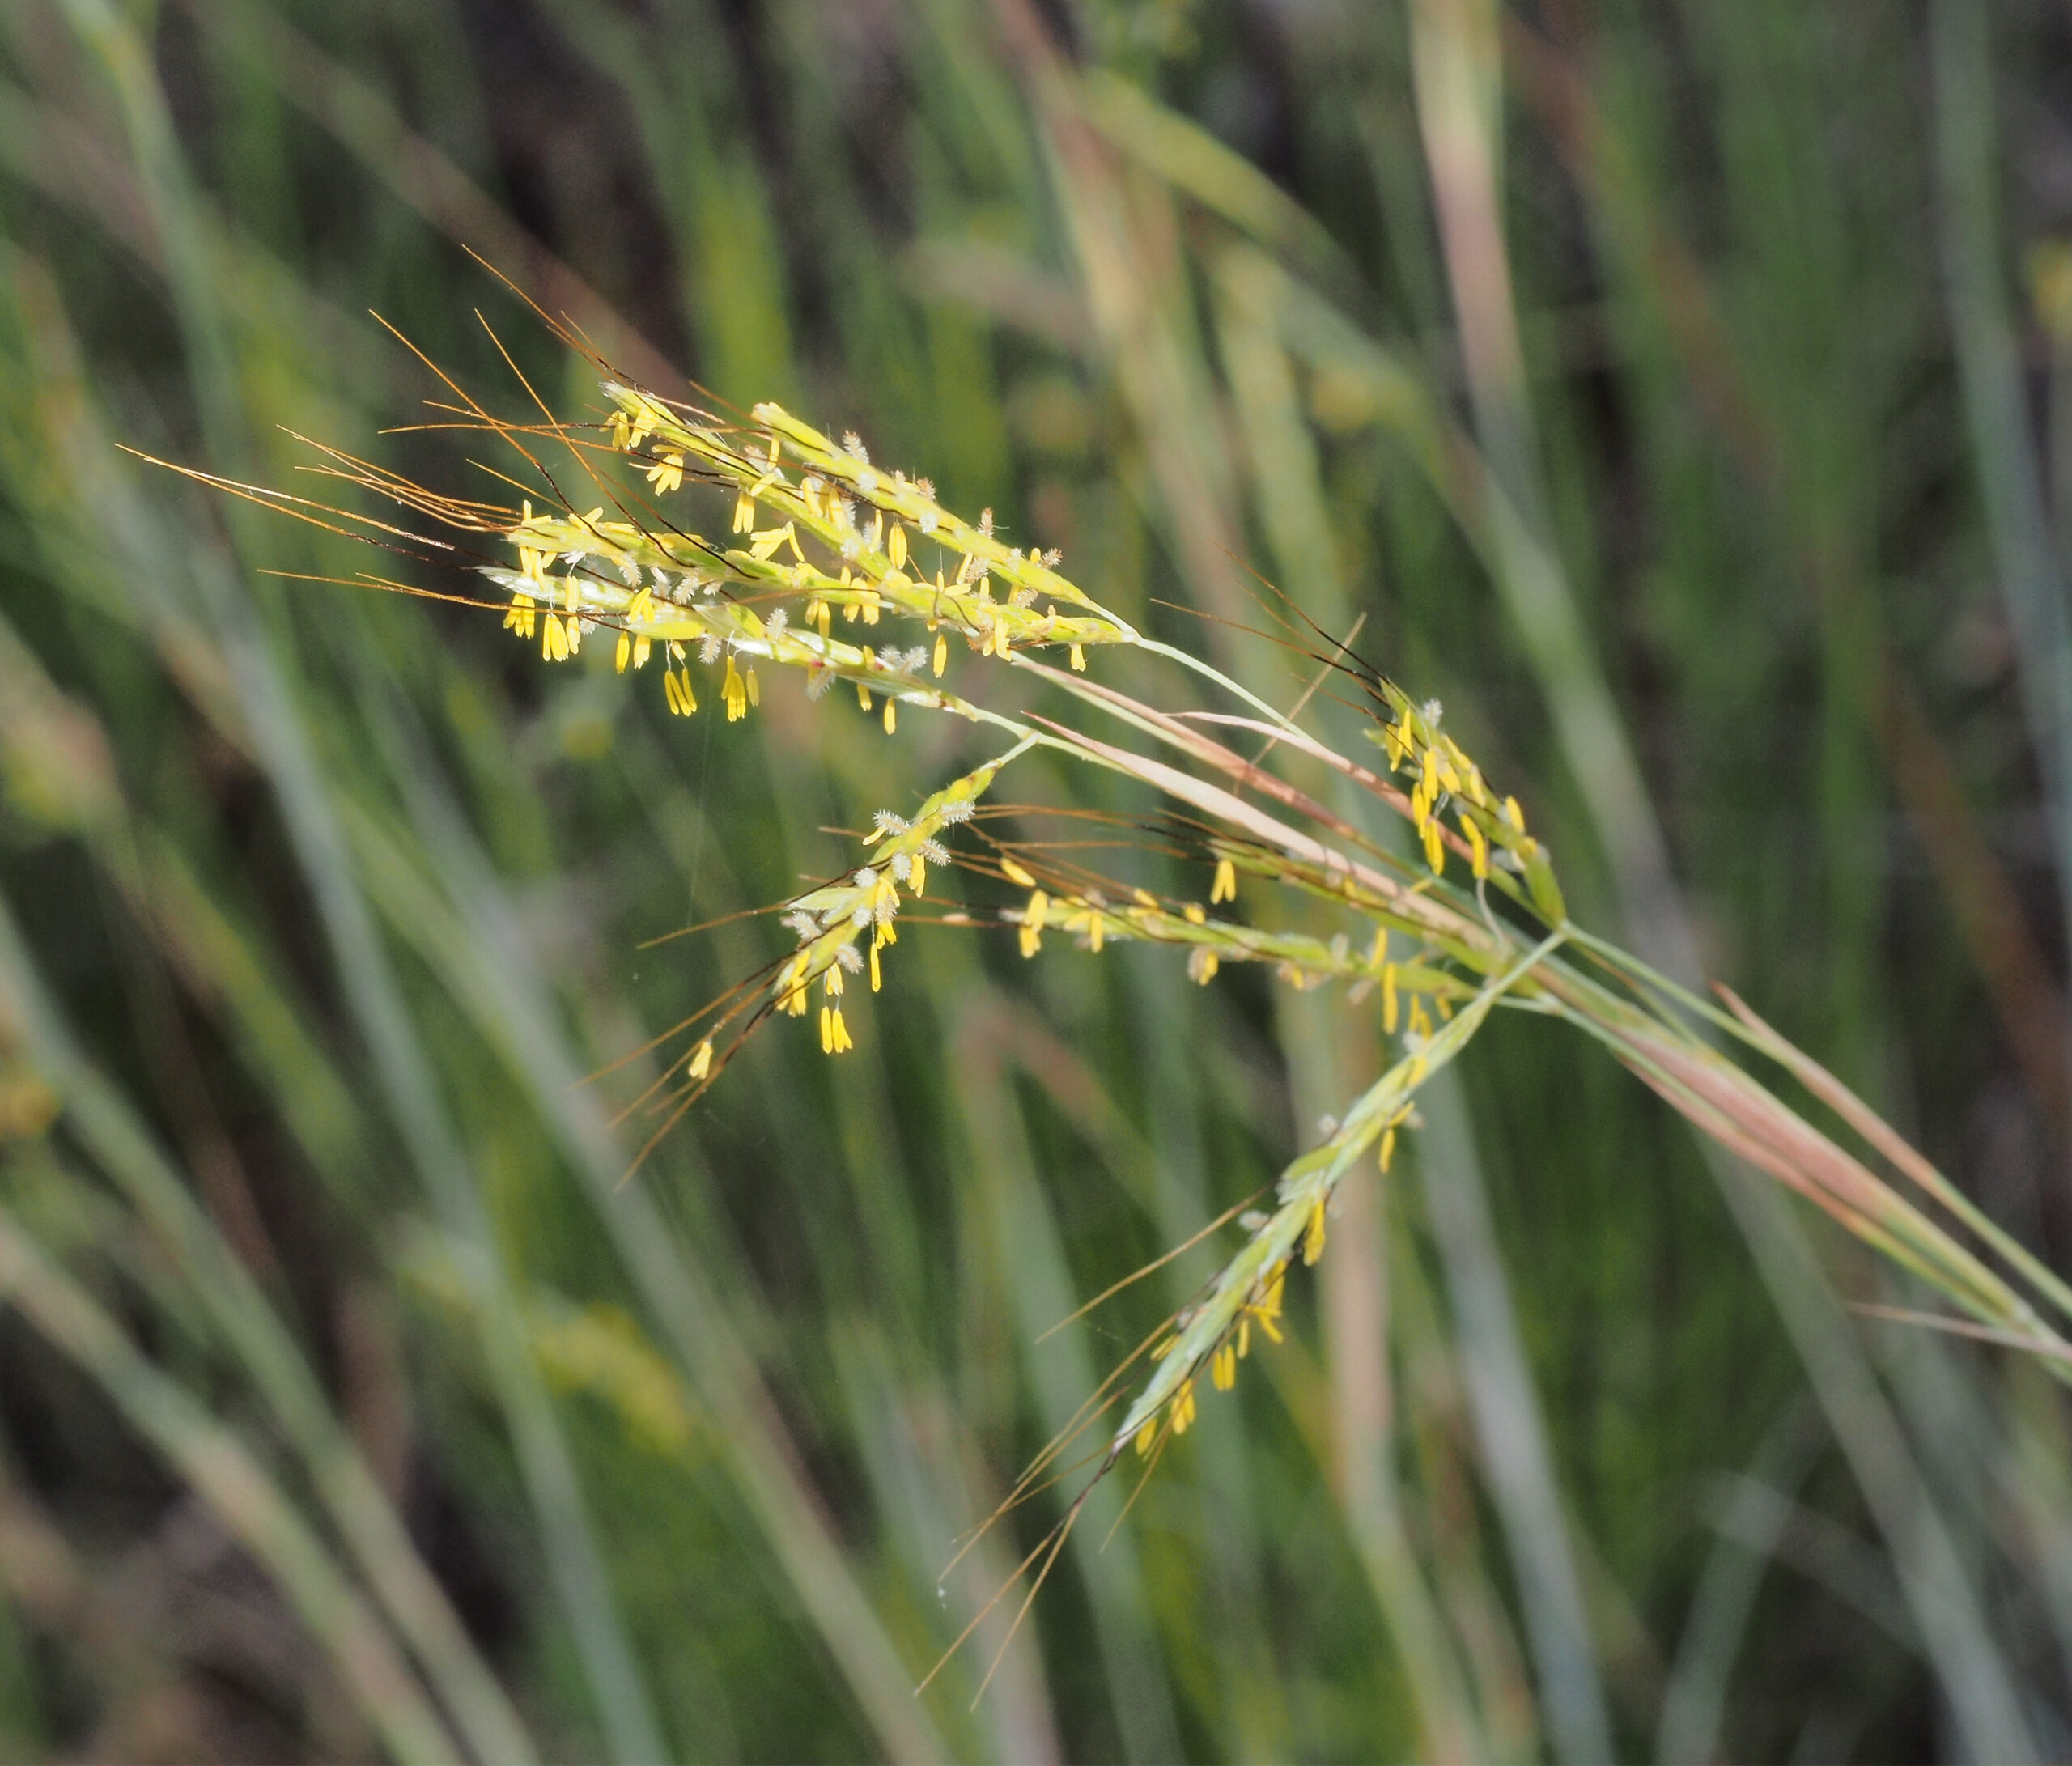 Photograph of the inflorescence of common thatching grass. The spikelets has awns and yellow anthers dangle from the inflorescences.